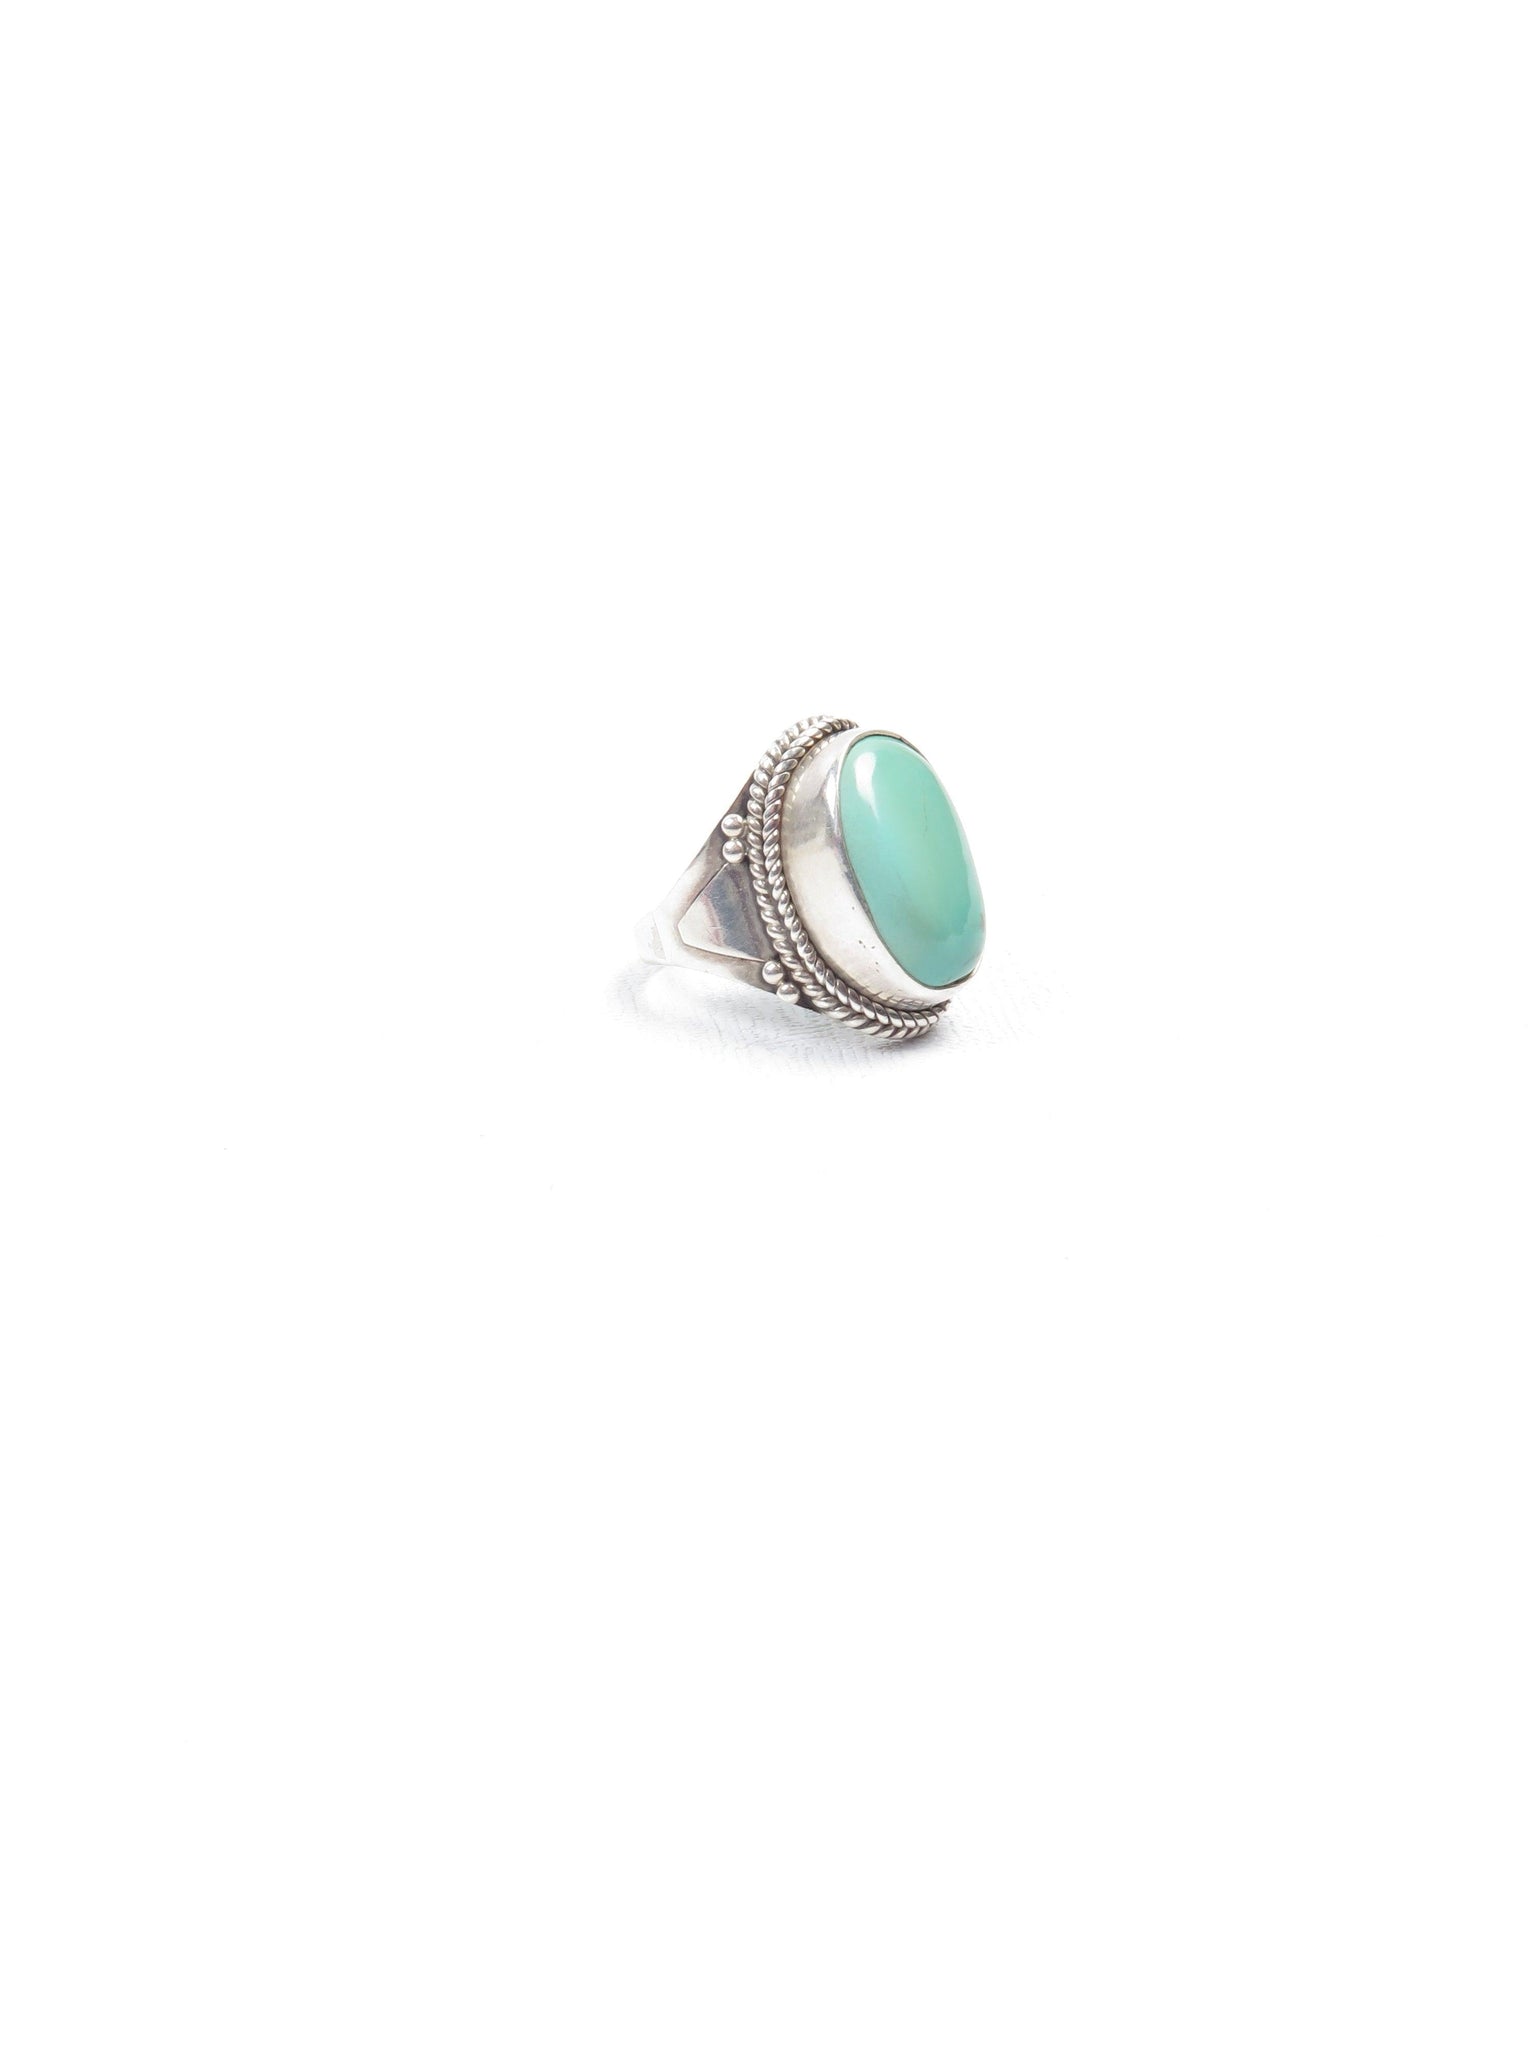 Green Turquoise & Silver Ring - The Harlequin